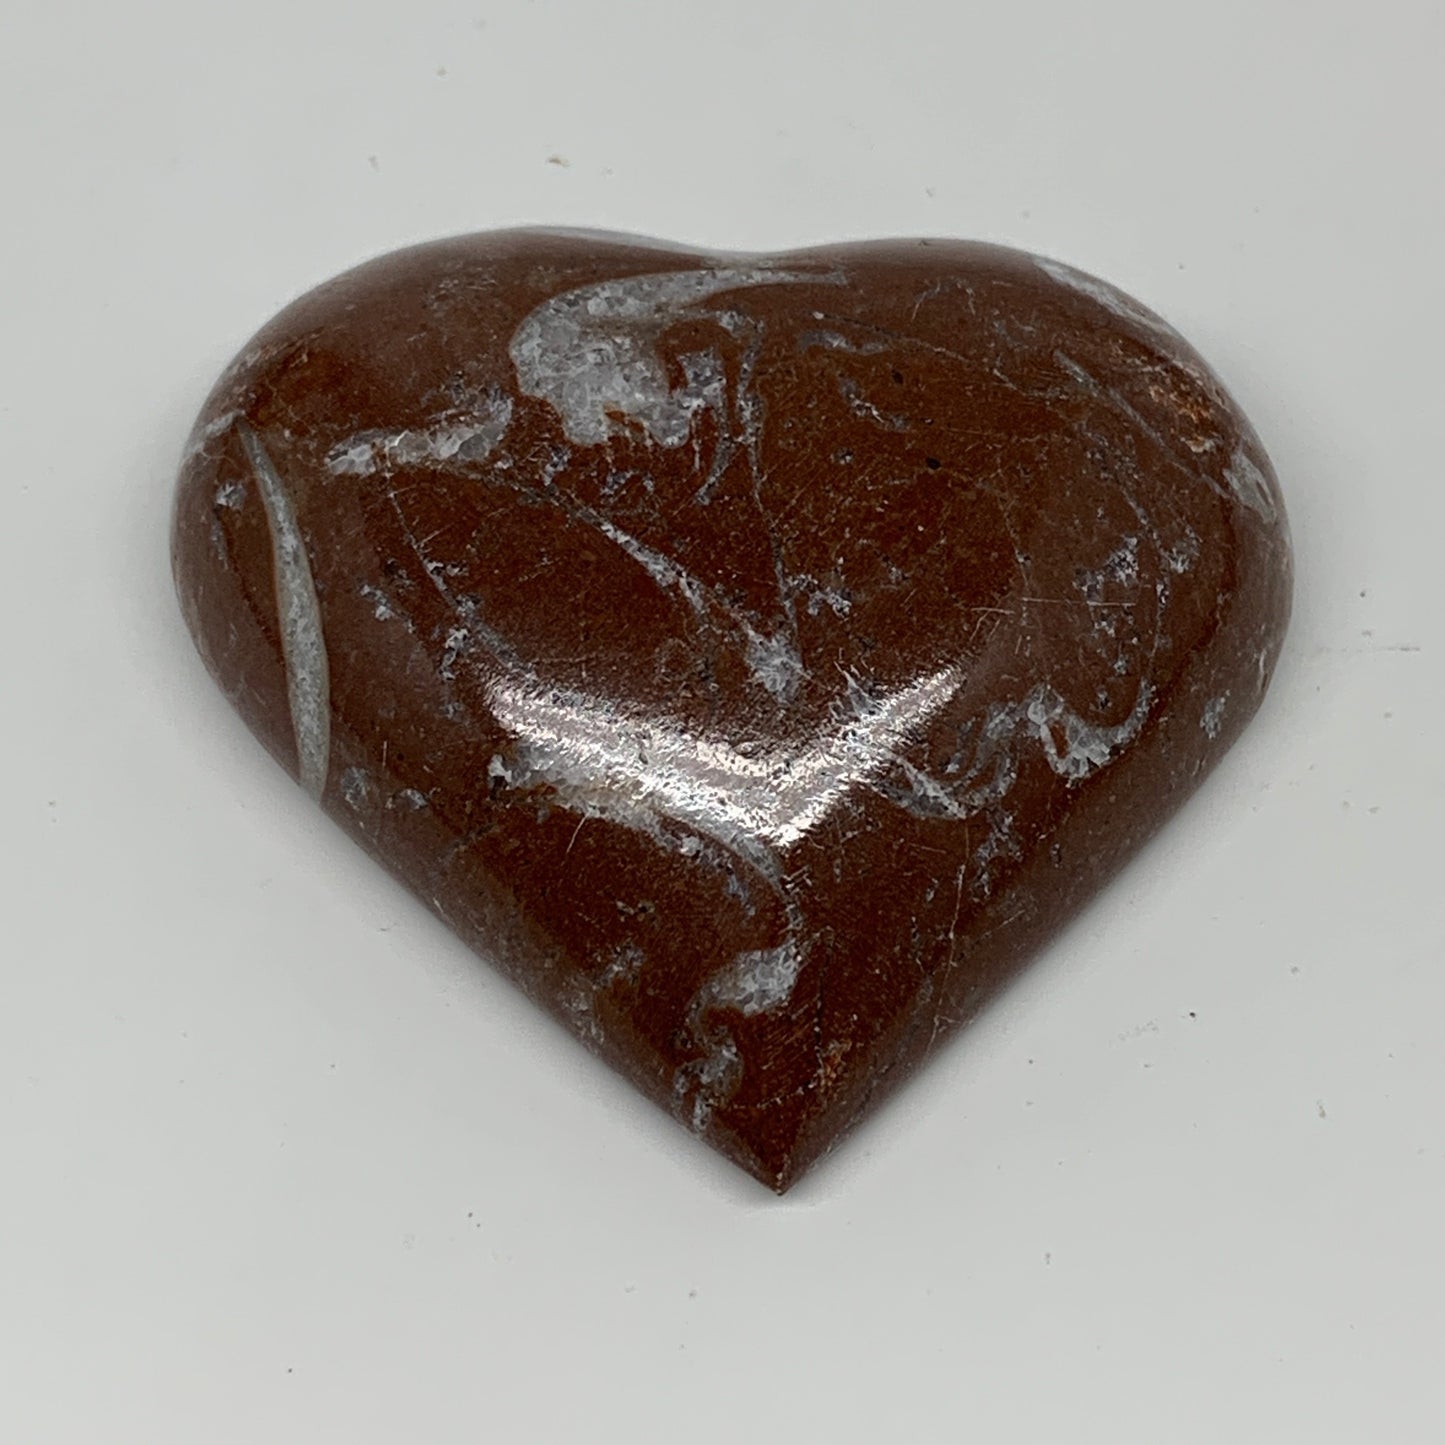 52g, 1.9" x 2.1"x 0.6", Natural Untreated Red Shell Fossils Half Heart @Morocco,